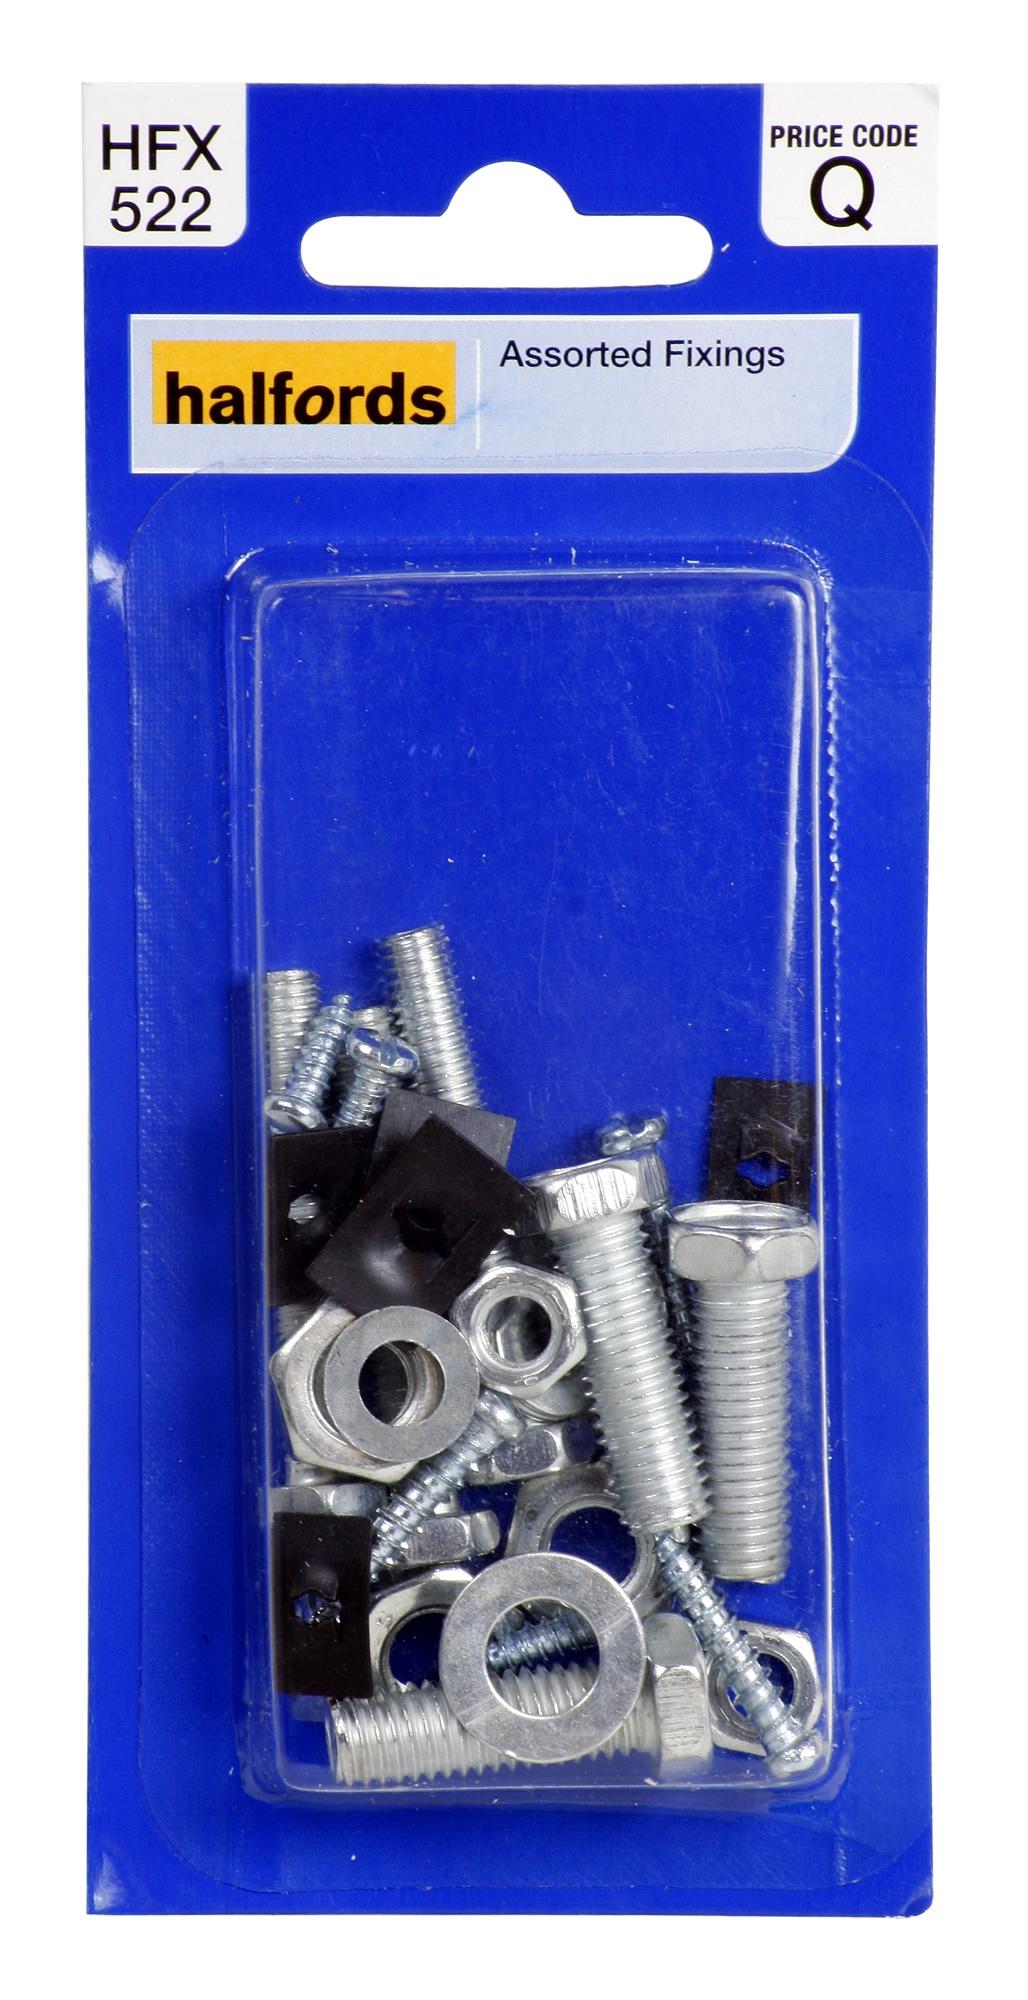 Halfords Assorted Fixings (Hfx522)